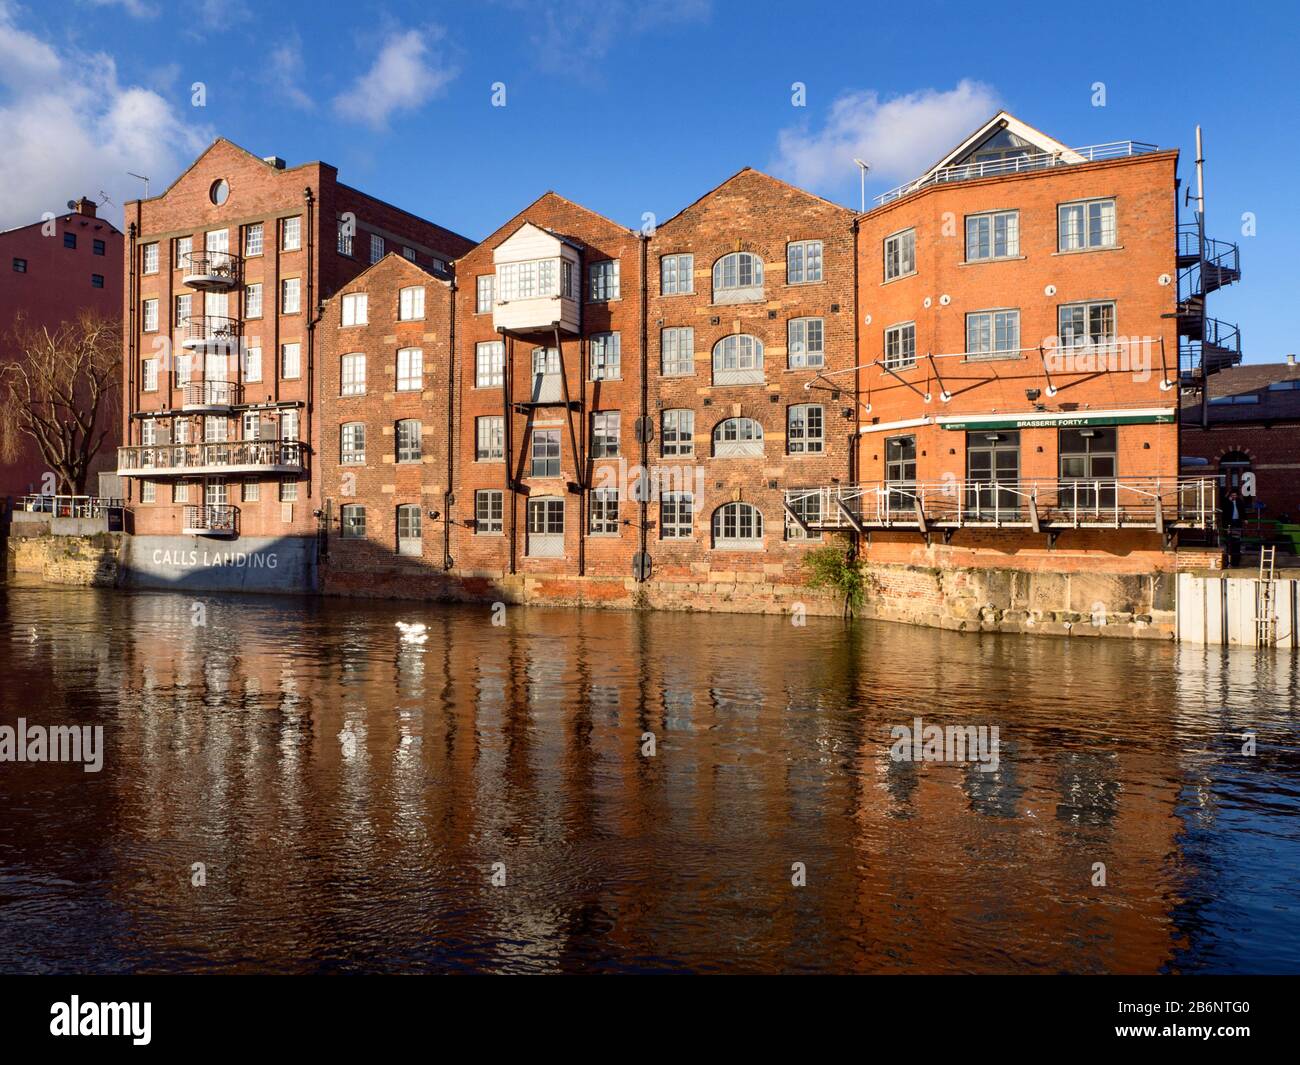 River frontage of former Fletland Mills converted warehouse buildings by the River Aire at Calls Landing in Leeds West Yorkshire England Stock Photo